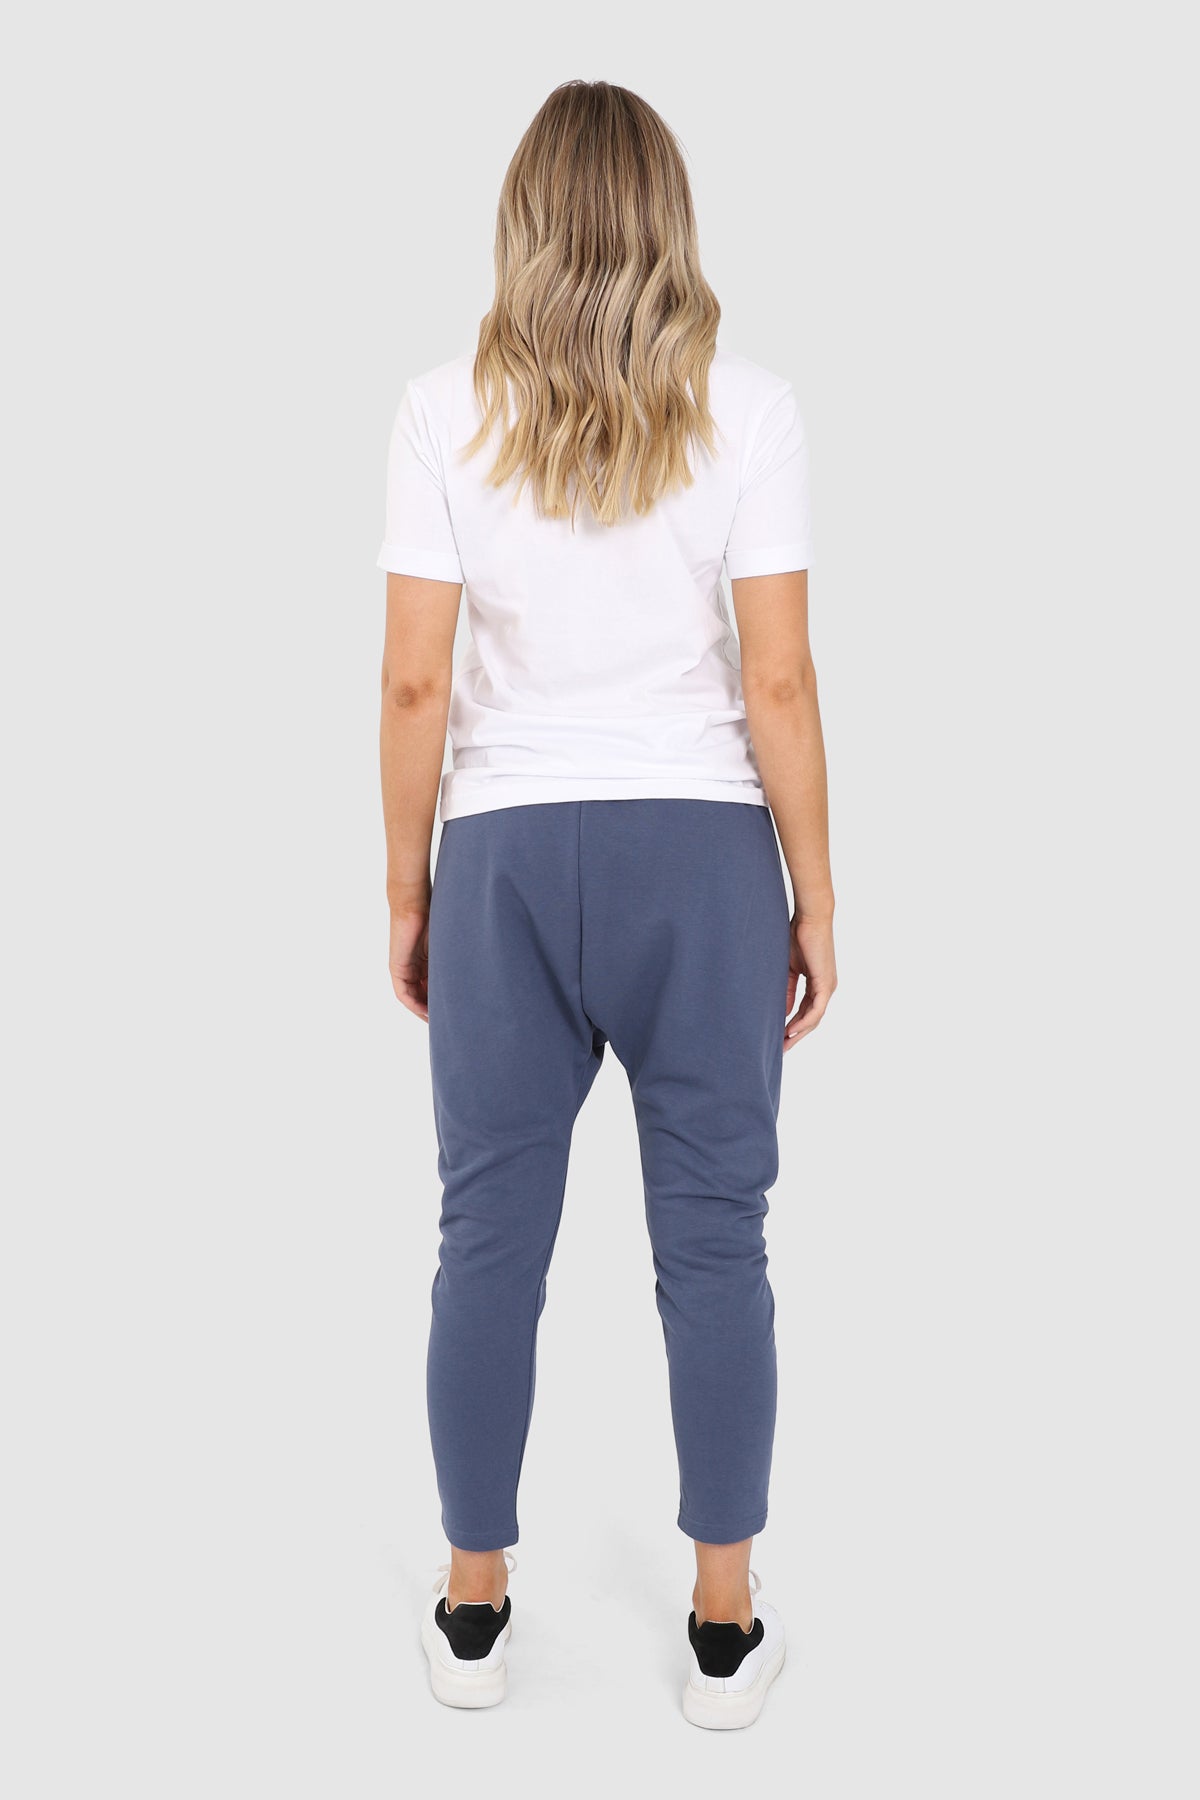 Tall Blonde Caucasian female wearing Adjustable Drawstring Drop Crotch pants Long Cotton-Blend Joggers Two Front Deep Pockets Casual Loungewear paired with graphic white t-shirt and white sneakers